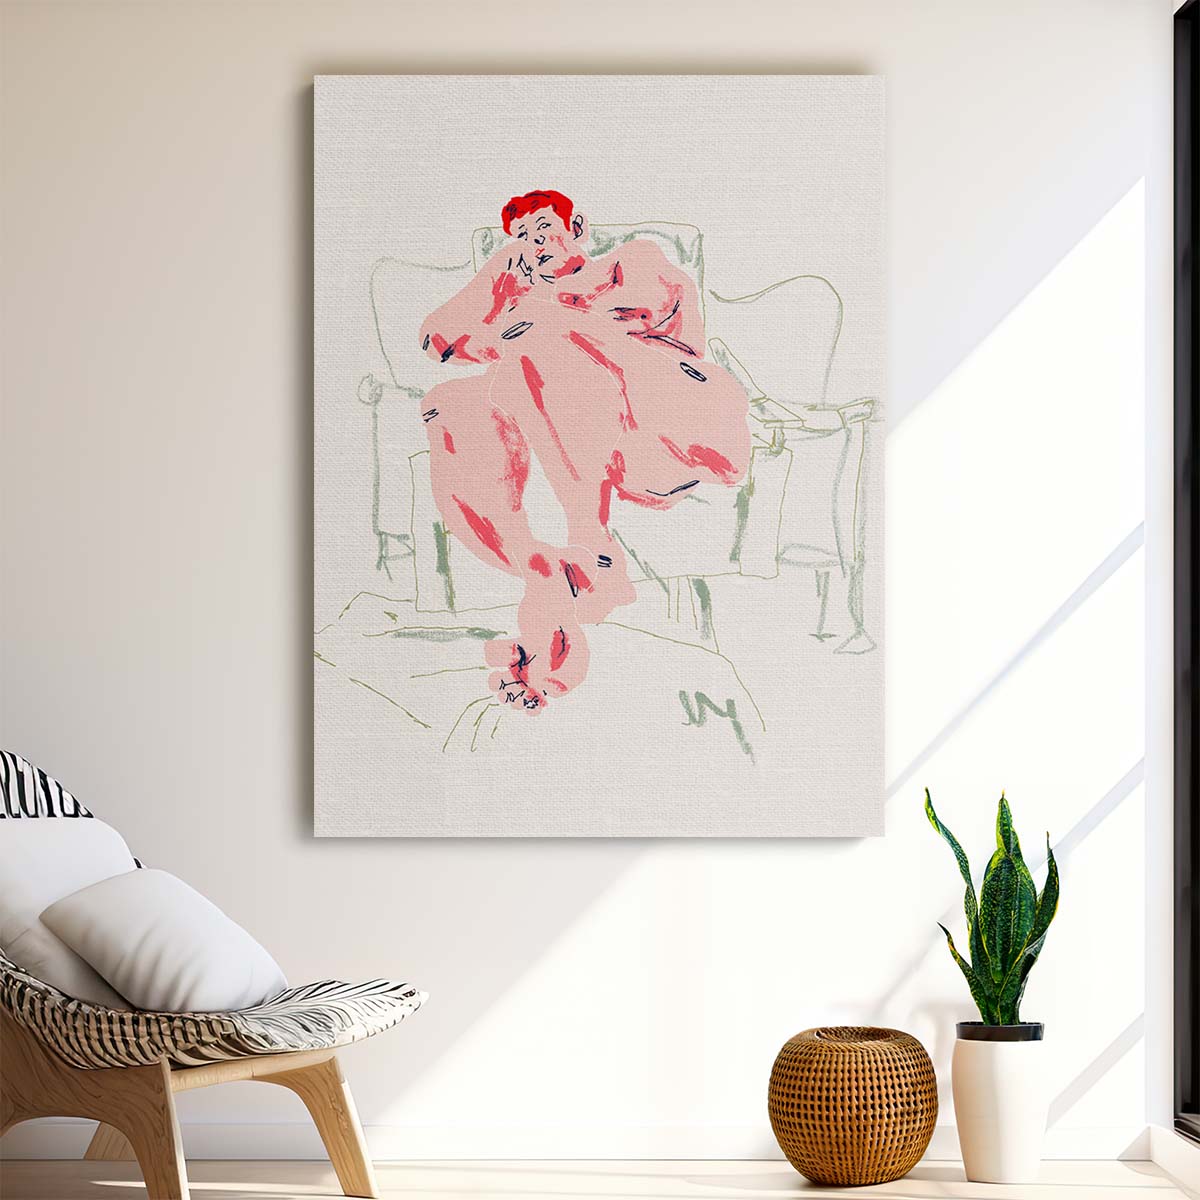 Francesco Gulina's Nude Model Chair Illustration Artwork by Luxuriance Designs, made in USA